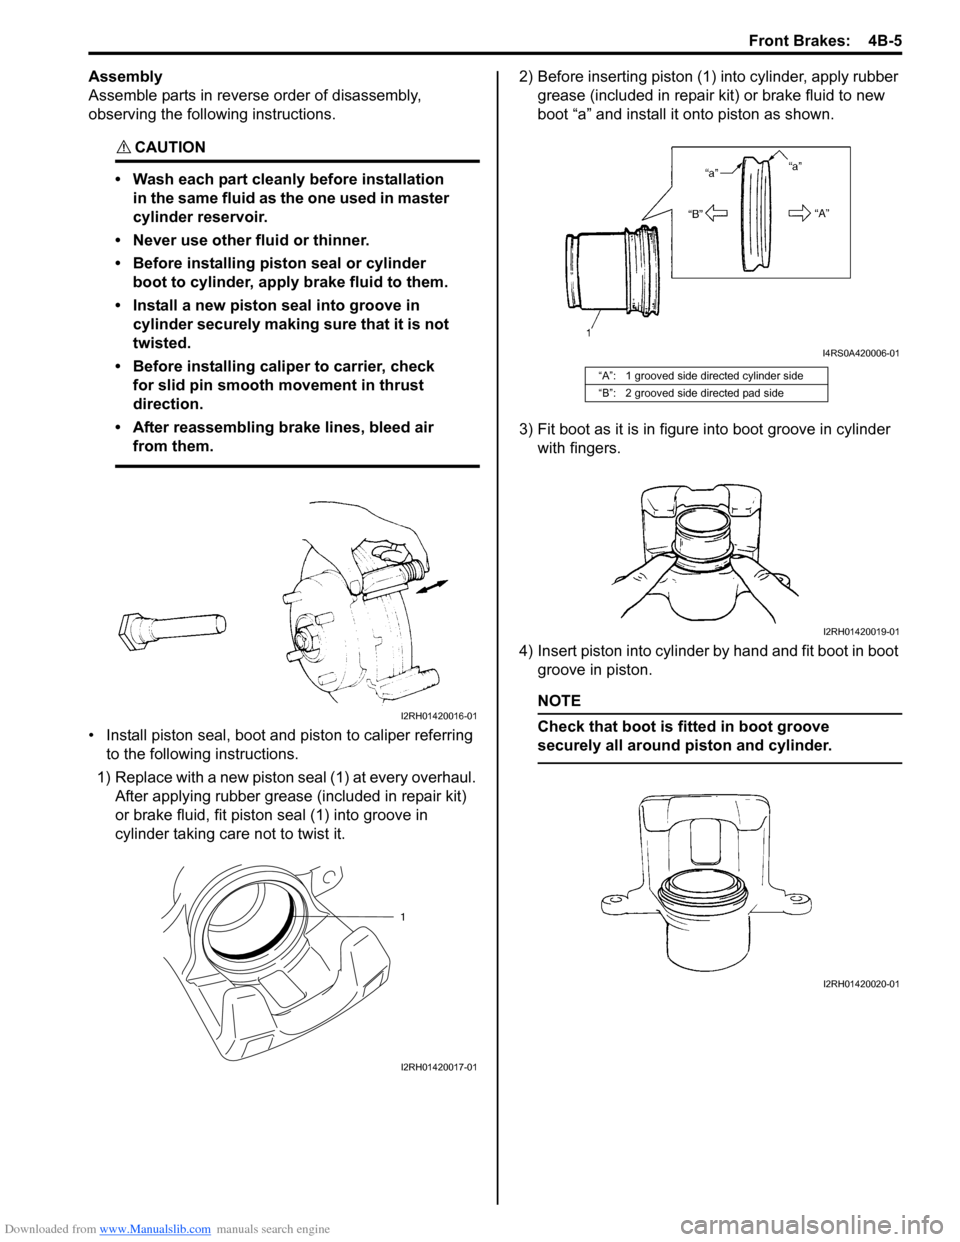 SUZUKI SWIFT 2006 2.G Service Workshop Manual Downloaded from www.Manualslib.com manuals search engine Front Brakes:  4B-5
Assembly
Assemble parts in reverse order of disassembly, 
observing the following instructions.
CAUTION! 
• Wash each par